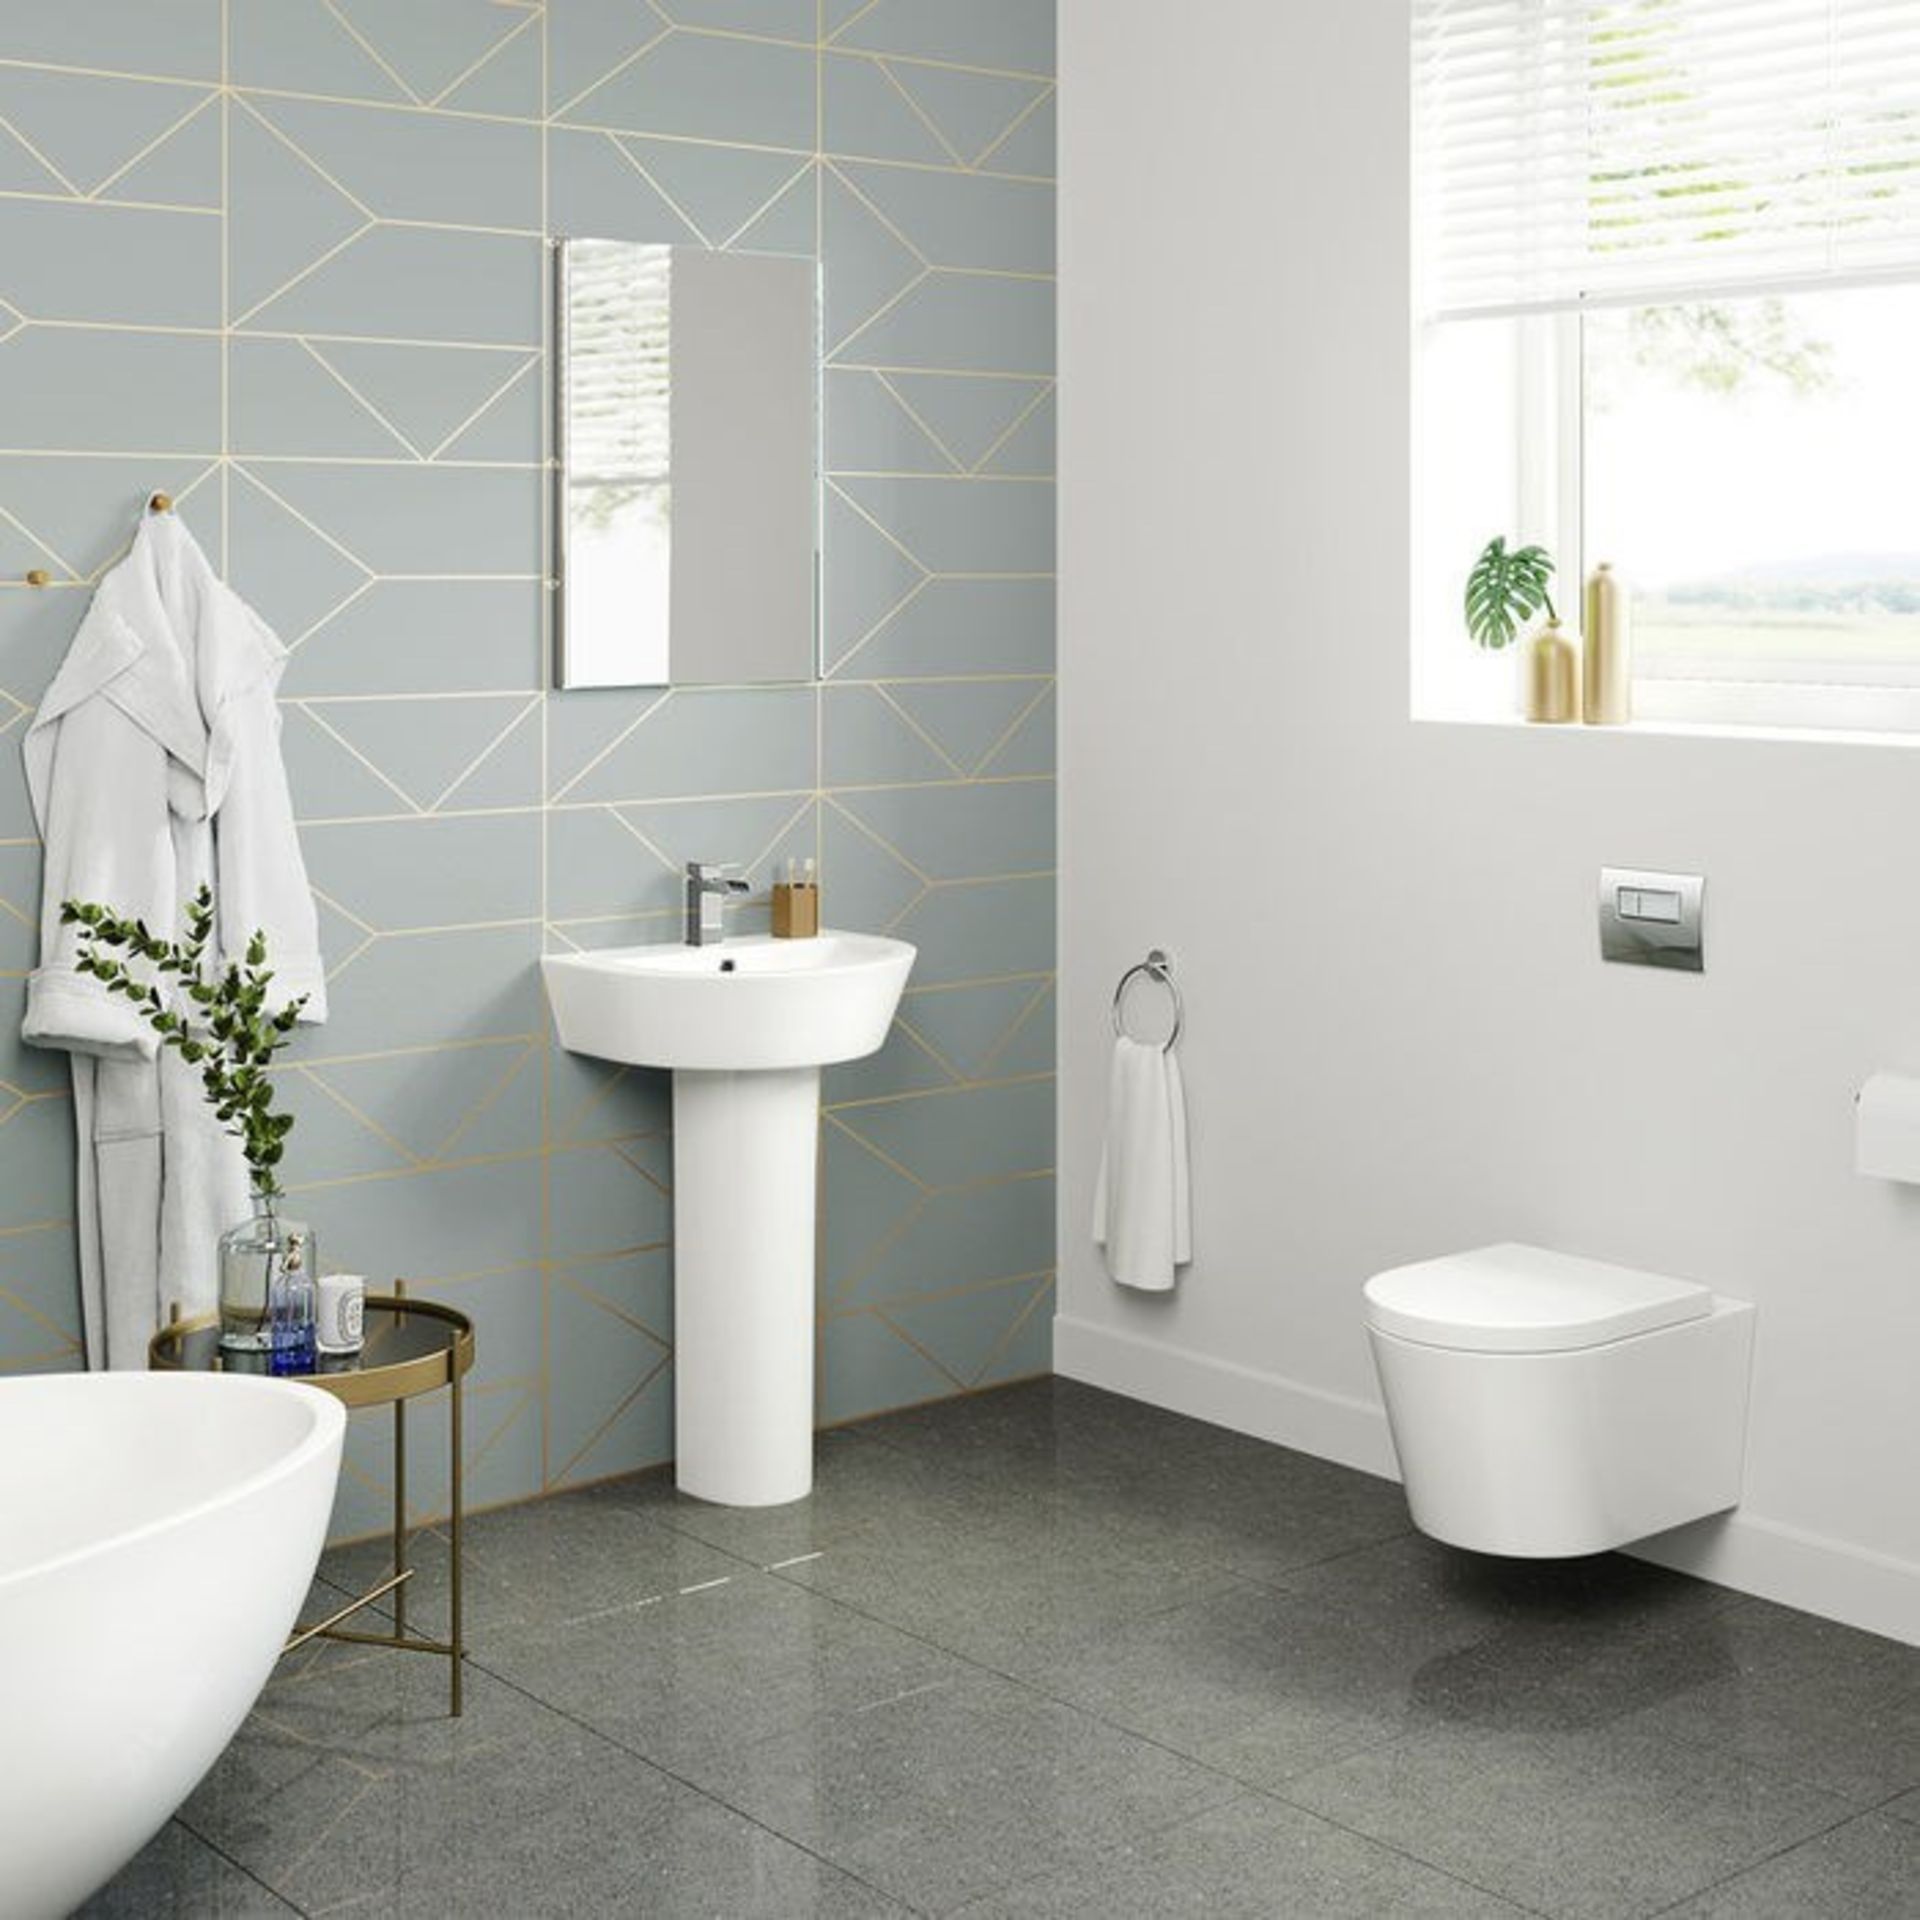 NEW & BOXED Lyon II Wall Hung Toilet inc Luxury Soft Close Seat. RRP £349.99.We love this bec... - Image 2 of 2